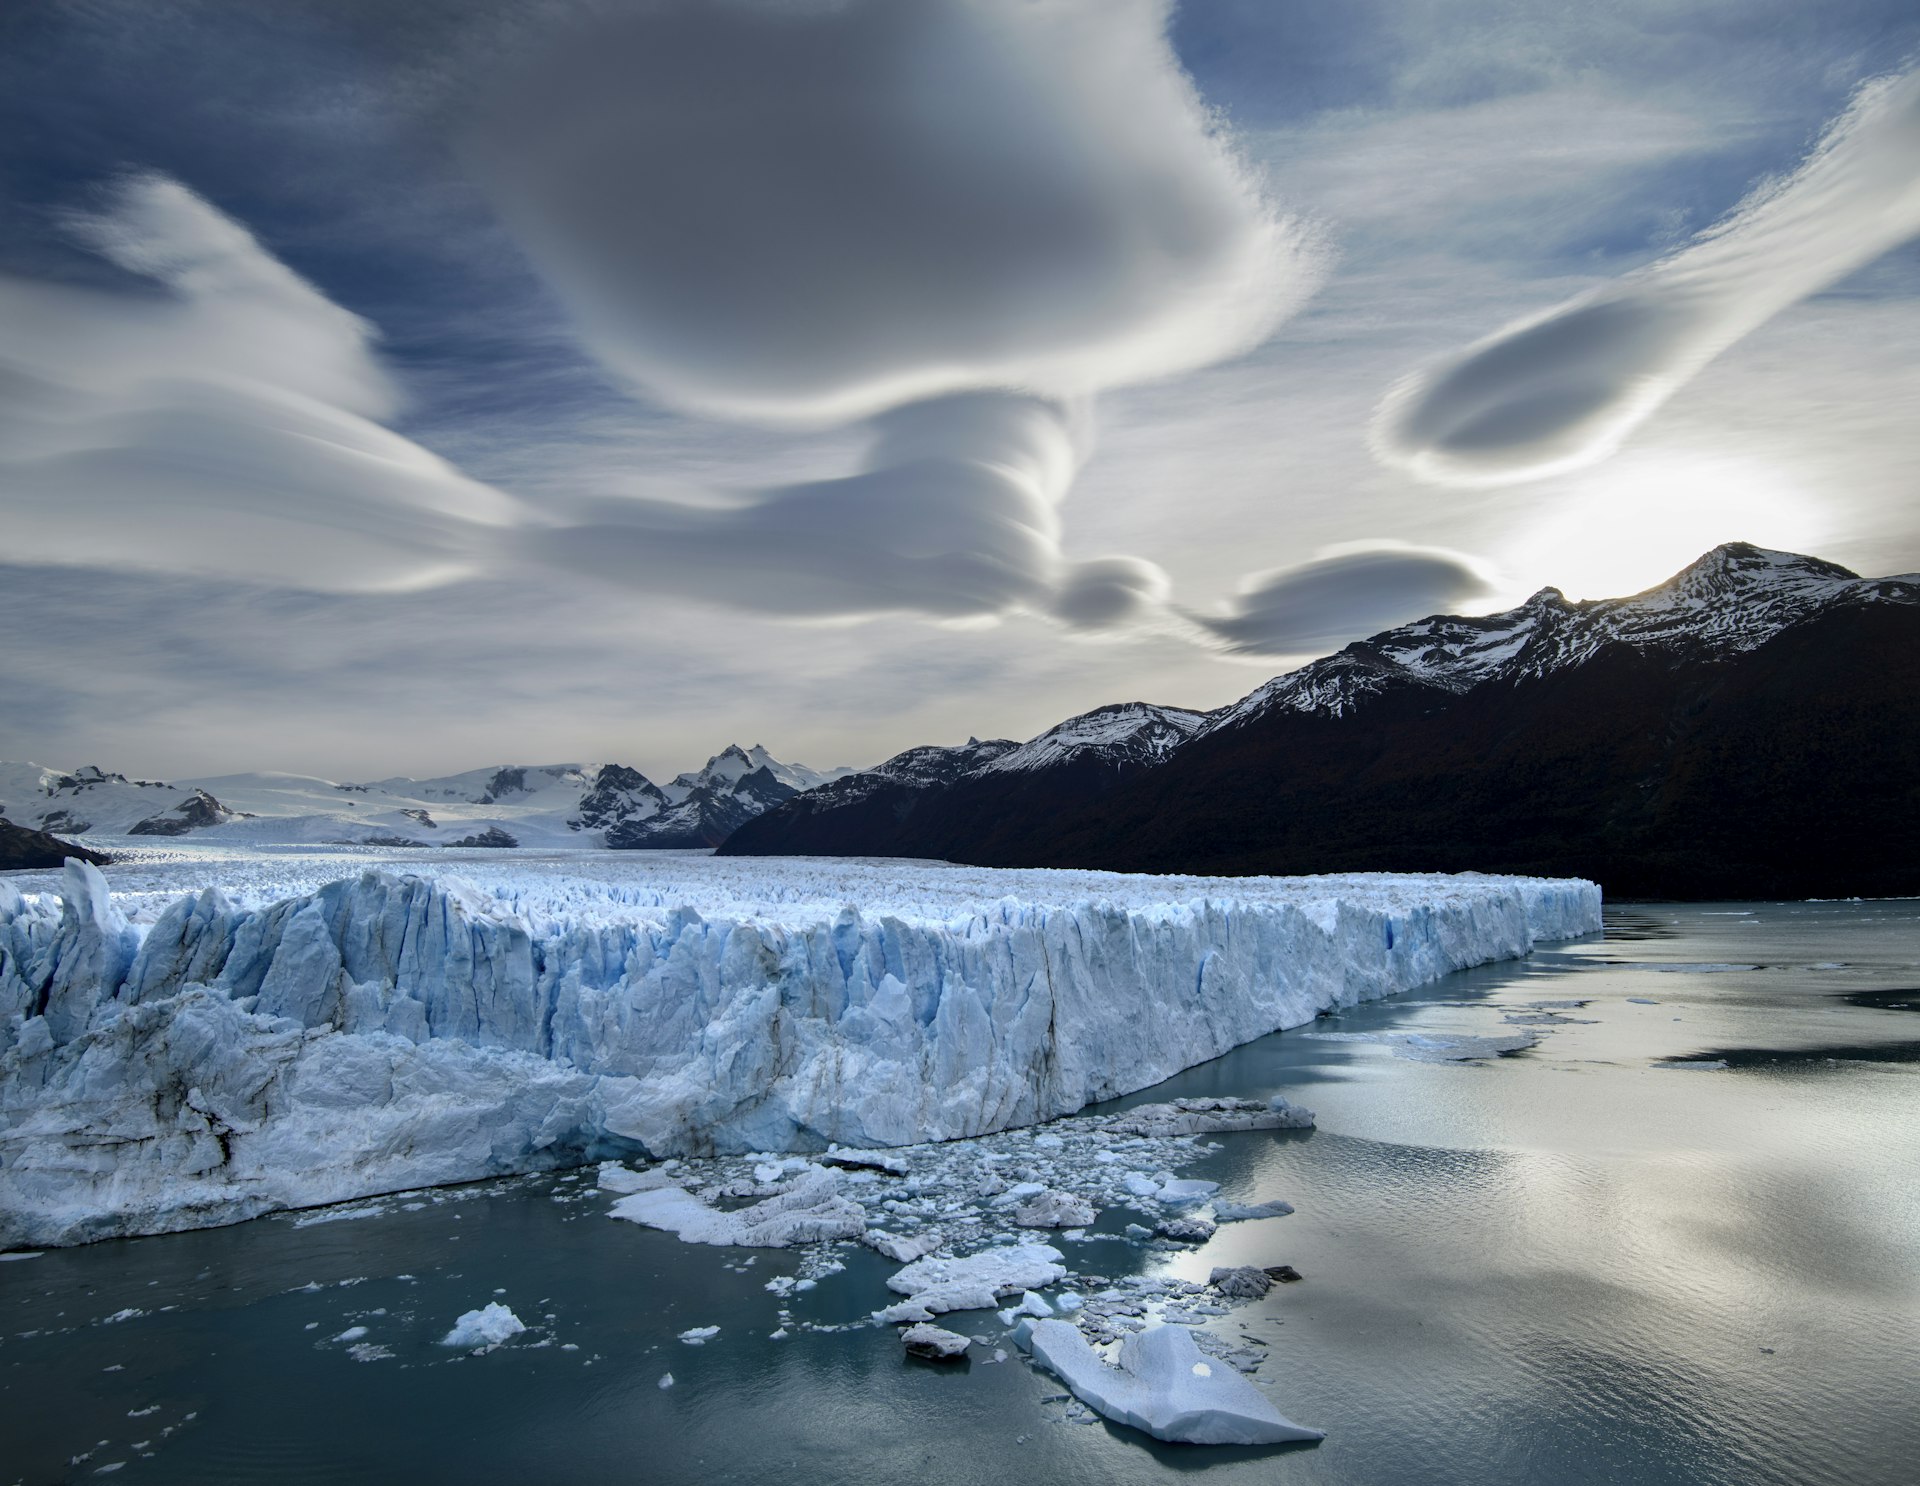 Under gray-white blob-like clouds, the Perito Moreno Glacier in Chile - a jagged blue-white mass of ice -- slowly moves in a glacial lake looking like a huge clifftop